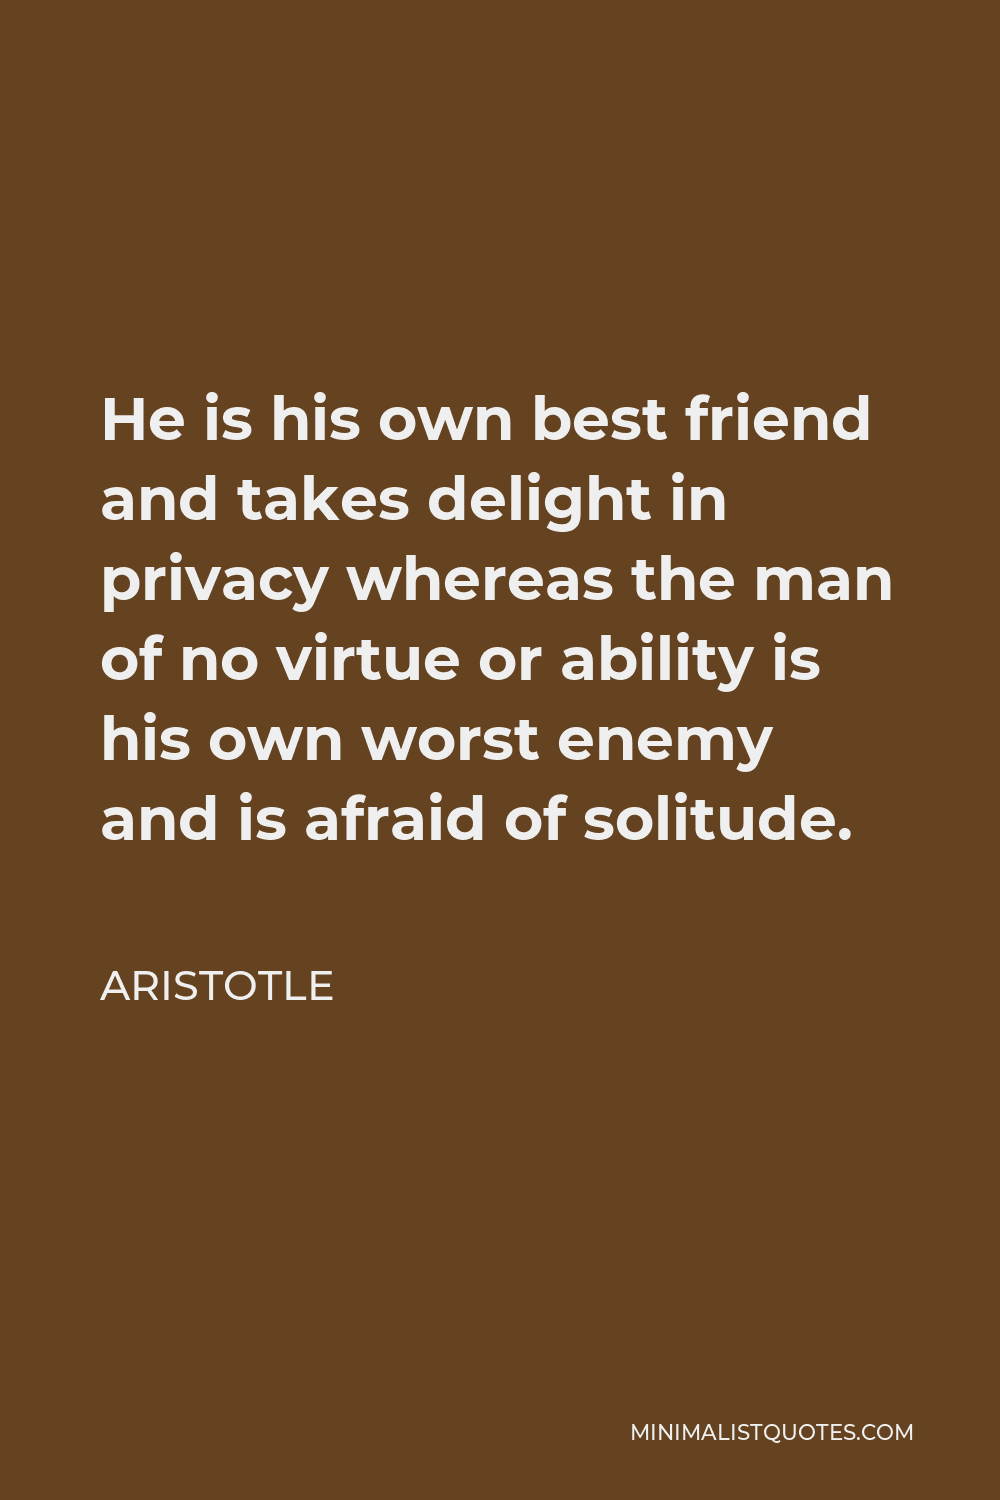 Aristotle Quote - He is his own best friend and takes delight in privacy whereas the man of no virtue or ability is his own worst enemy and is afraid of solitude.